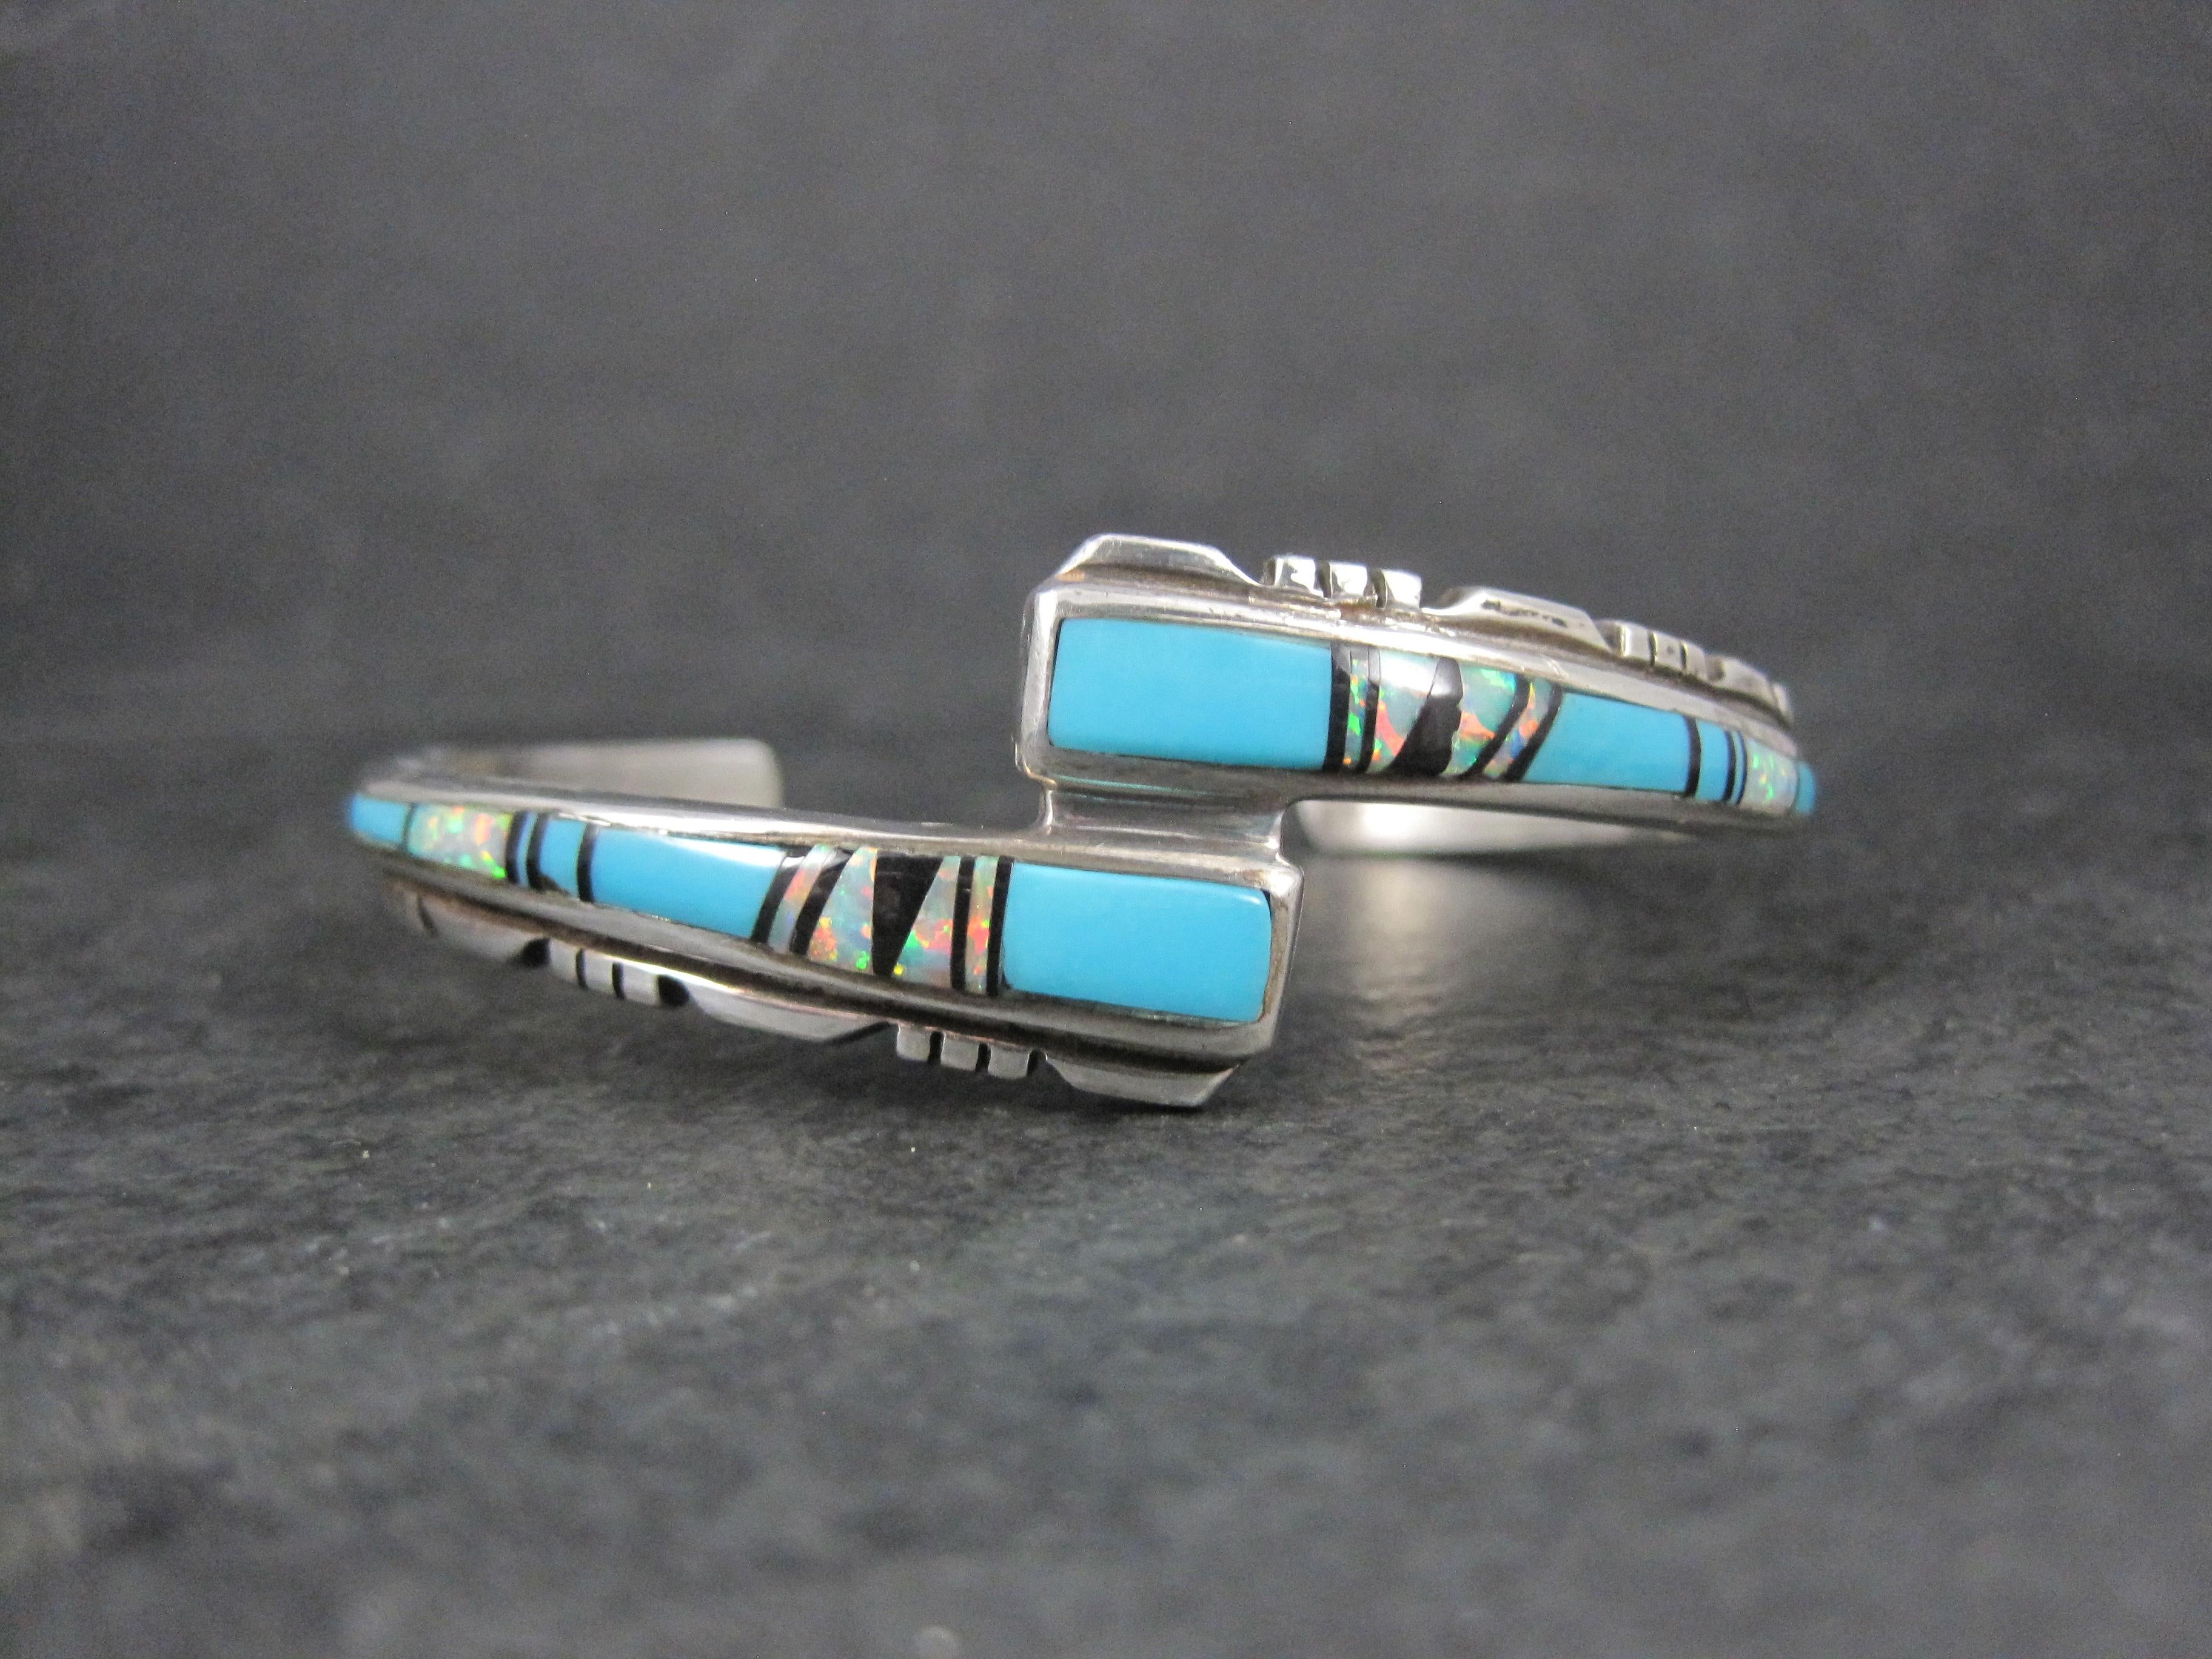 This beautiful, vintage, Southwestern cuff bracelet is sterling silver.
It features a combination of turquoise, opal and jet inlay.

The face of this cuff bracelet is 3/4 of an inch at its widest point.
It has an inner circumference of 5 3/4 inches,